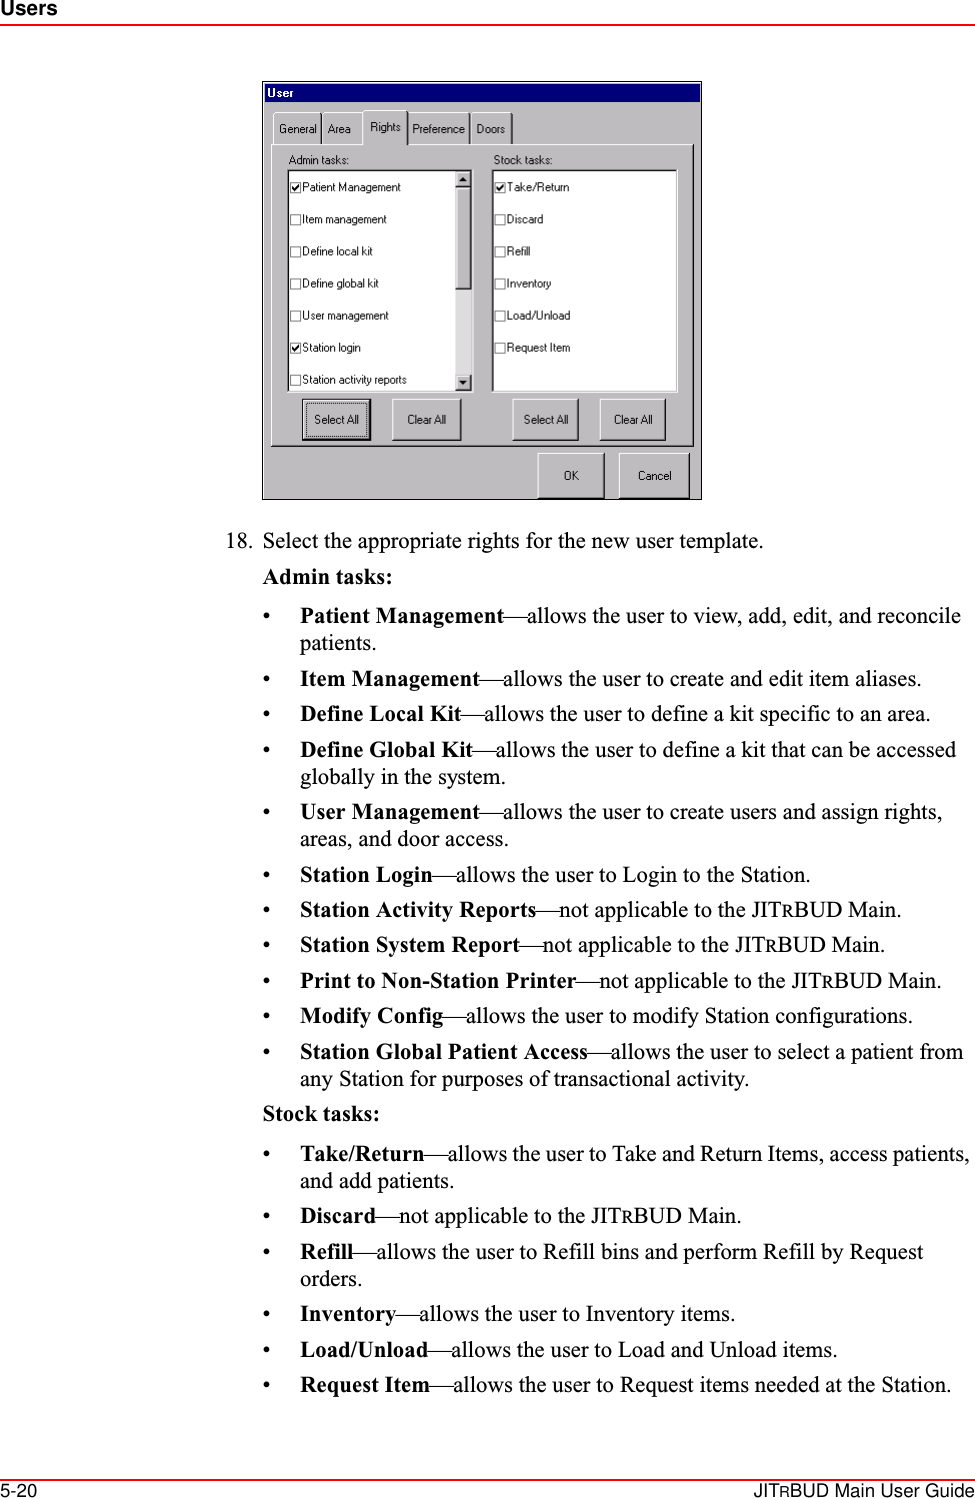 Users5-20 JITRBUD Main User Guide18. Select the appropriate rights for the new user template.Admin tasks:•Patient Management—allows the user to view, add, edit, and reconcile patients.•Item Management—allows the user to create and edit item aliases.•Define Local Kit—allows the user to define a kit specific to an area.•Define Global Kit—allows the user to define a kit that can be accessed globally in the system.•User Management—allows the user to create users and assign rights, areas, and door access.•Station Login—allows the user to Login to the Station.•Station Activity Reports—not applicable to the JITRBUD Main.•Station System Report—not applicable to the JITRBUD Main.•Print to Non-Station Printer—not applicable to the JITRBUD Main.•Modify Config—allows the user to modify Station configurations.•Station Global Patient Access—allows the user to select a patient from any Station for purposes of transactional activity.Stock tasks:•Take/Return—allows the user to Take and Return Items, access patients, and add patients.•Discard—not applicable to the JITRBUD Main.•Refill—allows the user to Refill bins and perform Refill by Request orders.•Inventory—allows the user to Inventory items.•Load/Unload—allows the user to Load and Unload items.•Request Item—allows the user to Request items needed at the Station.